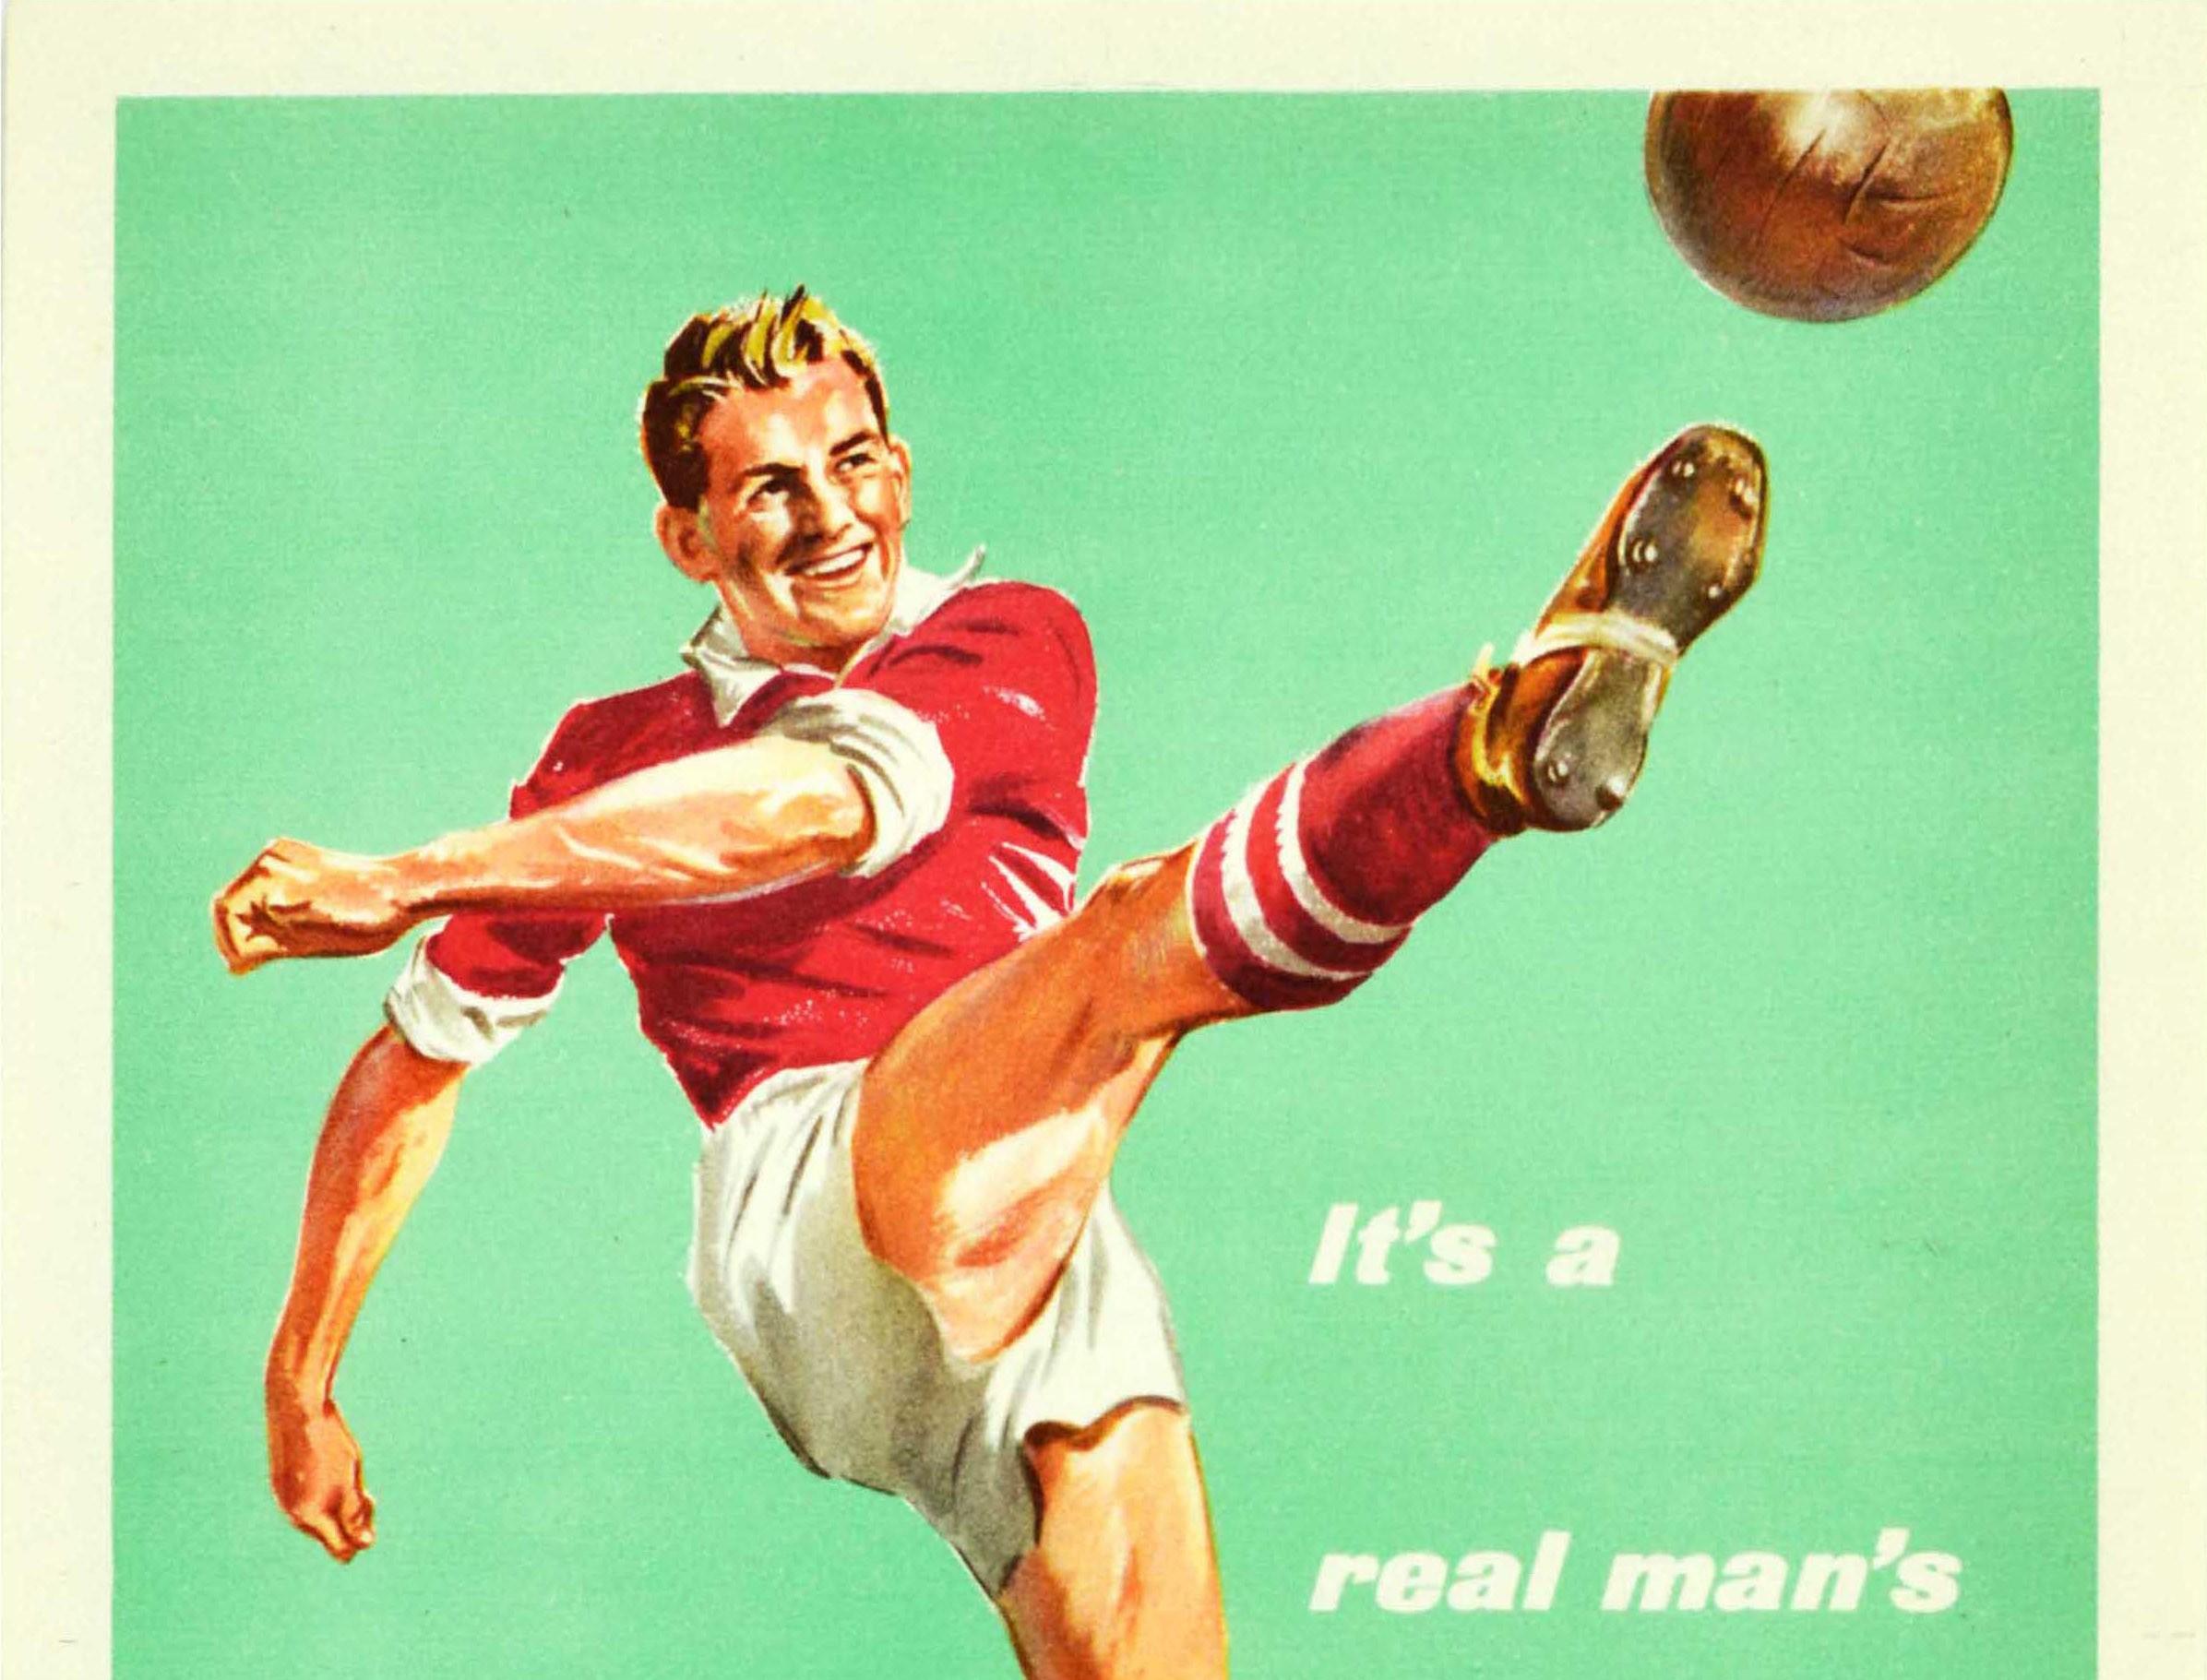 Original vintage British Army military recruitment poster - Join the Regular Army - featuring a smiling man in a red and white football kit kicking a ball against a pale green background next to the slogan in white - It's a real man's life - and the